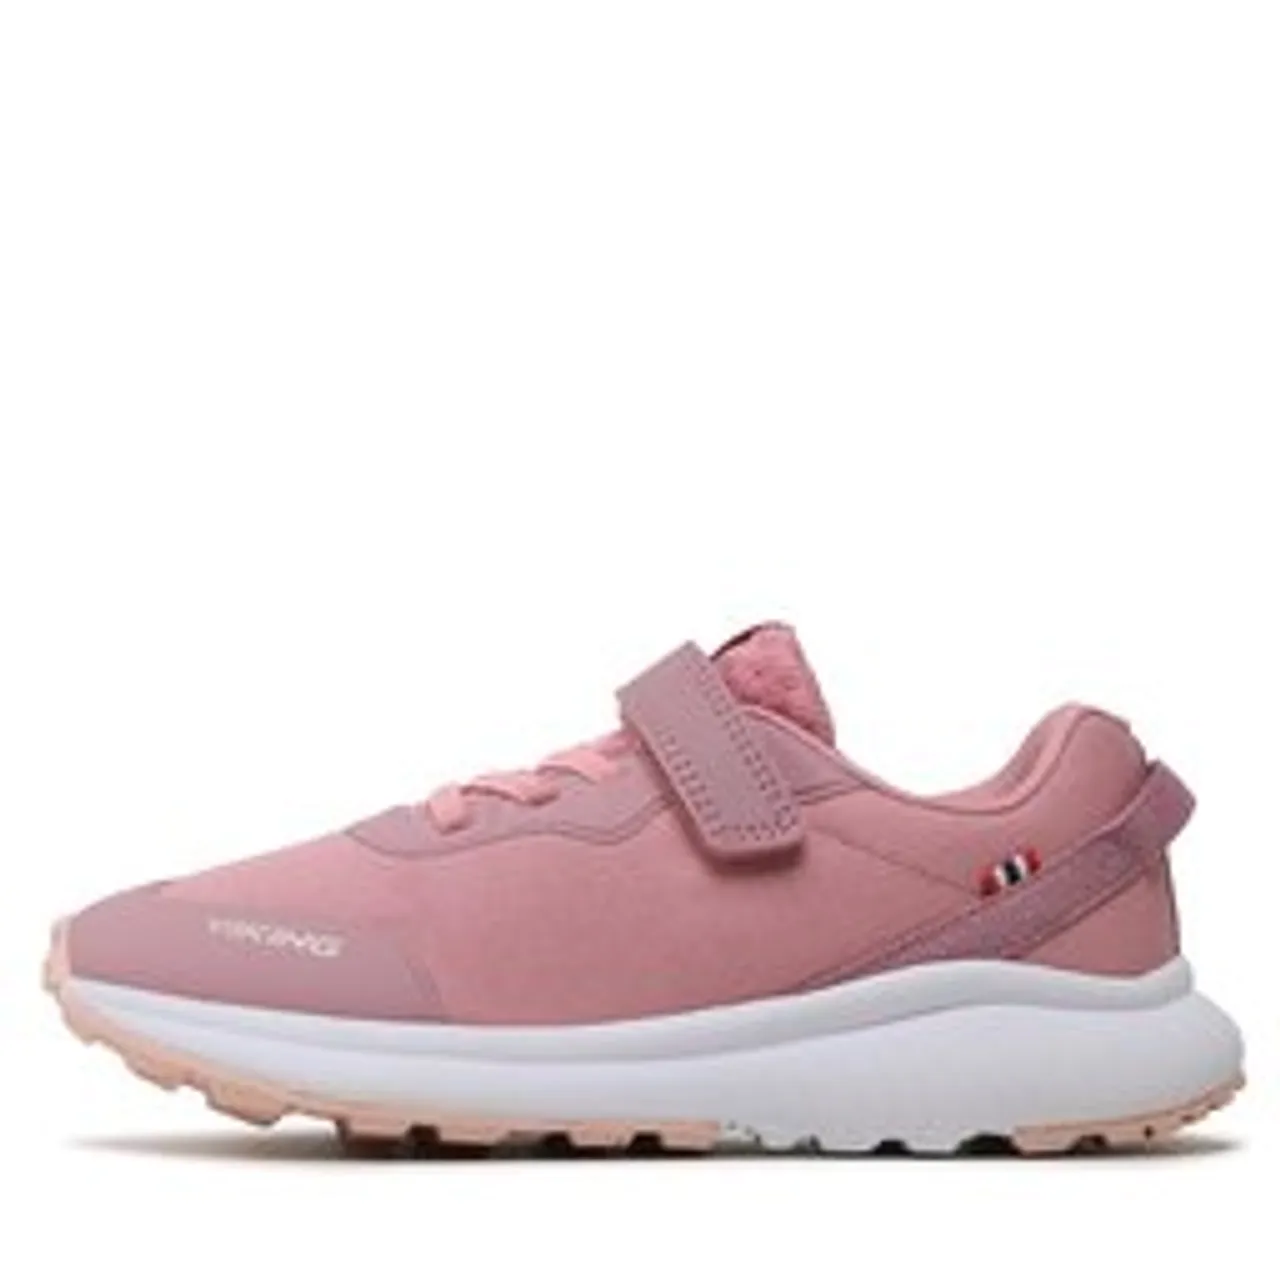 Sneakers Viking Aery Dal 1V 3-52610-94 Dusty Pink